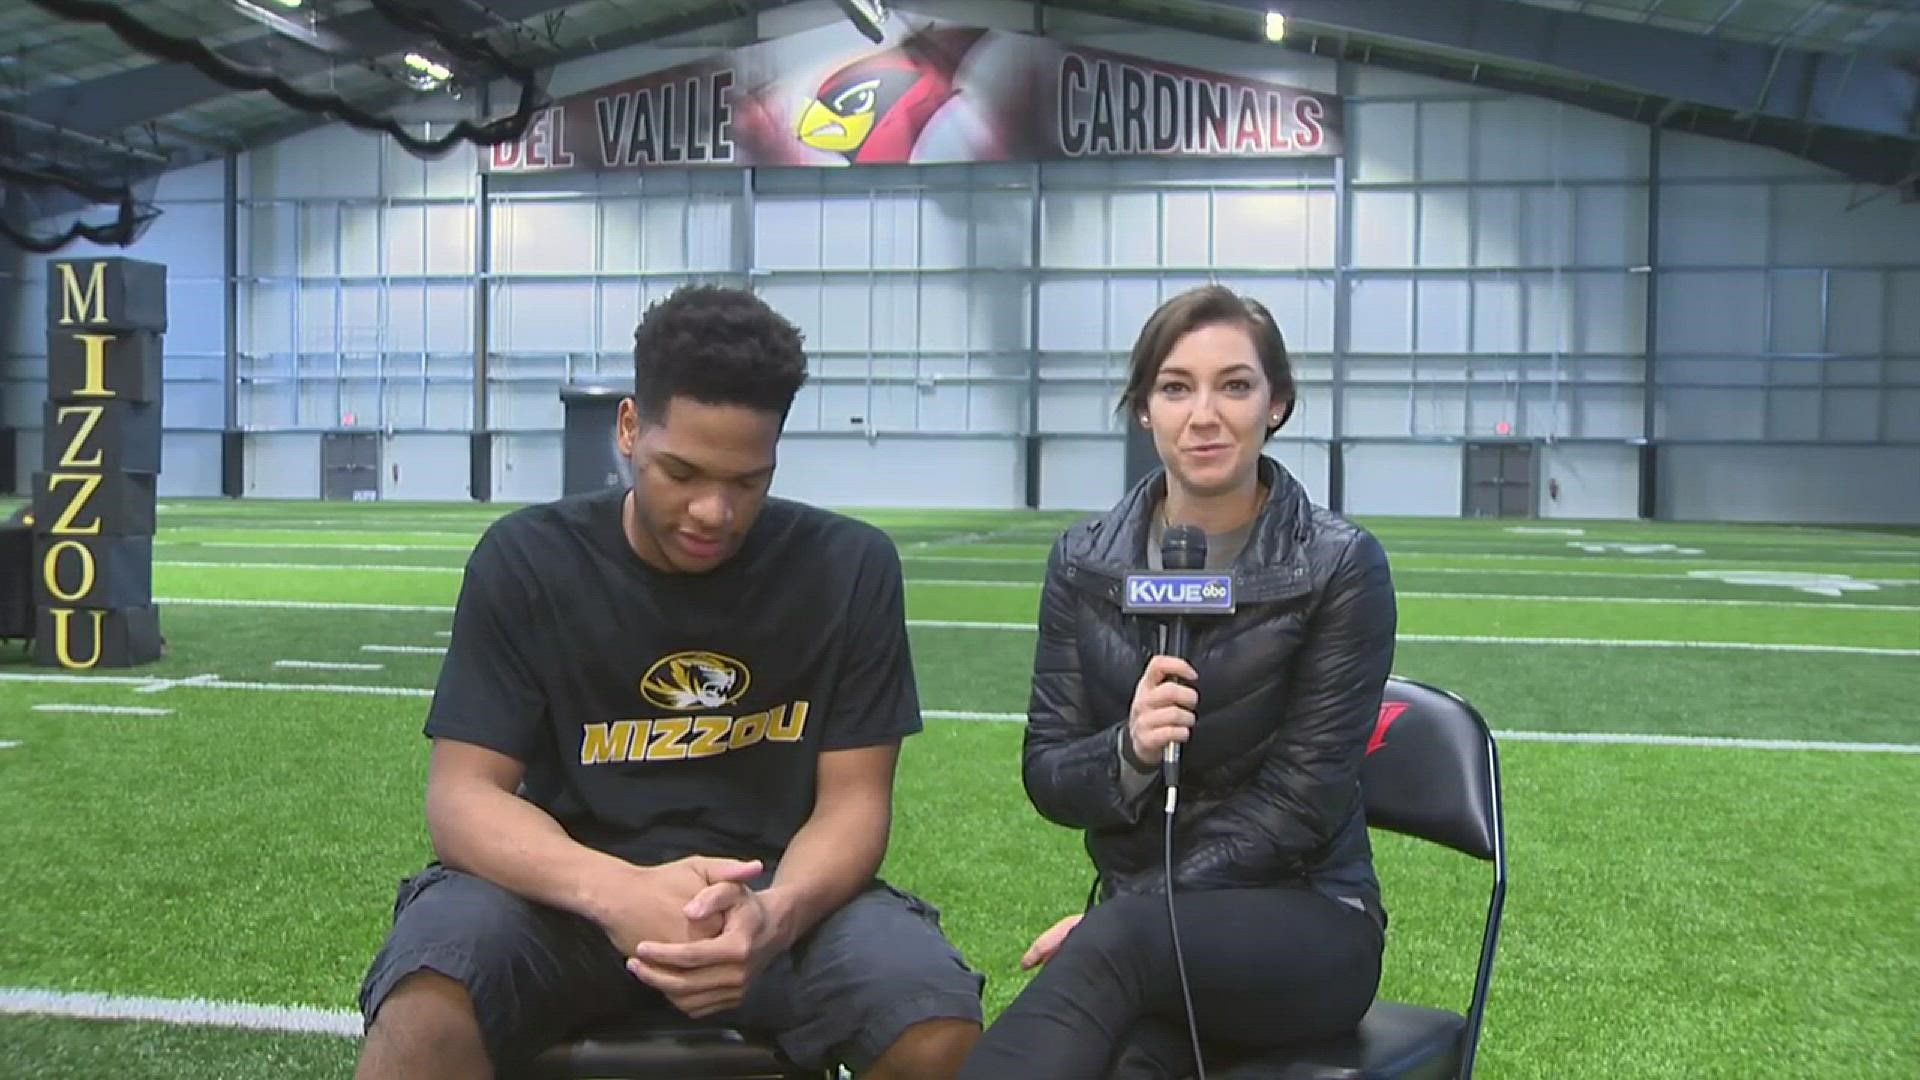 Del Valle's Cameron Wilkins talks about signing with Missouri with KVUE's Stacy Slayden